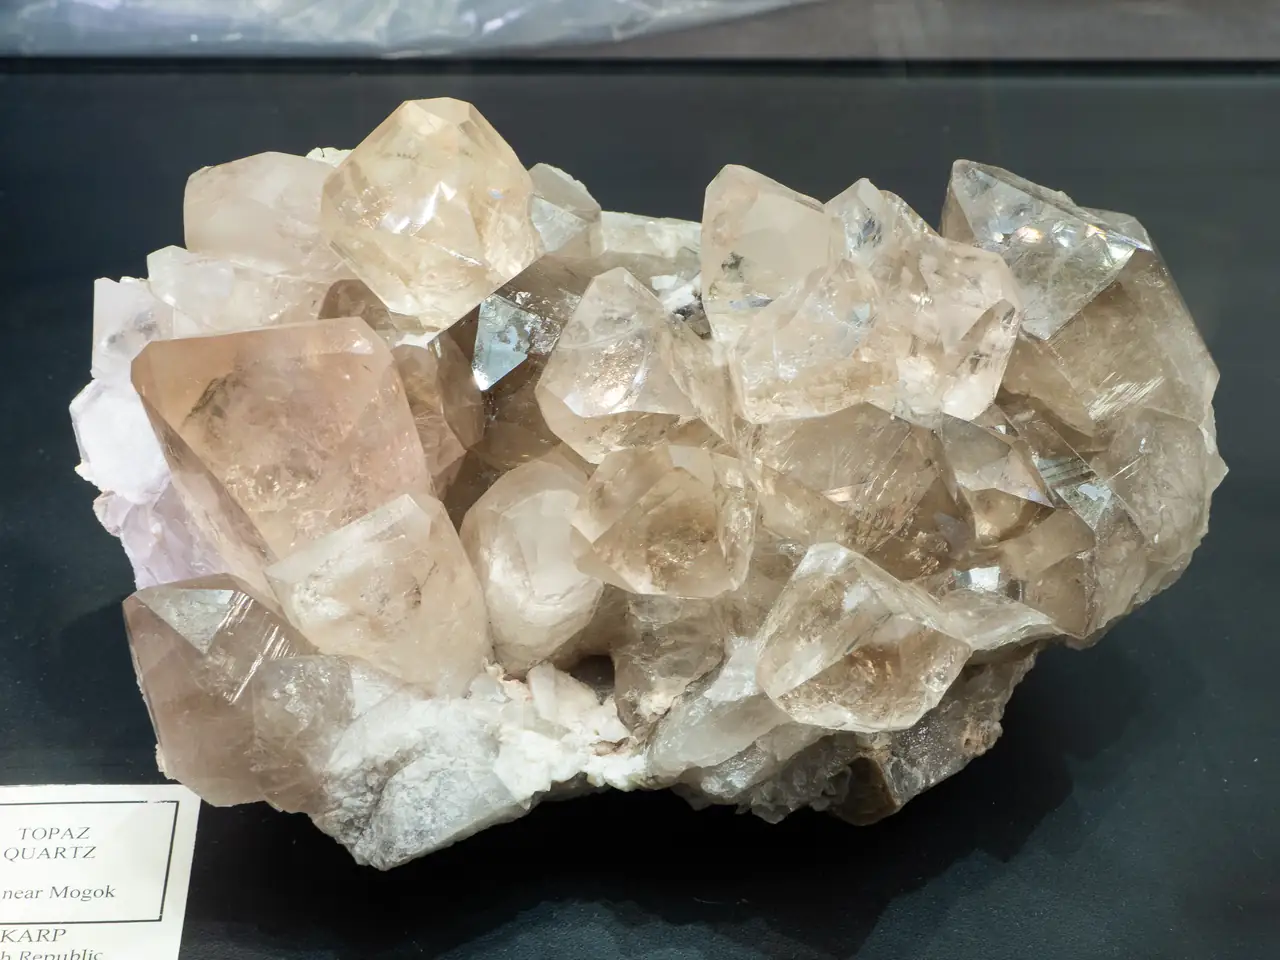 Nice cluster of topaz crystals from Pantaw, Myanmar.